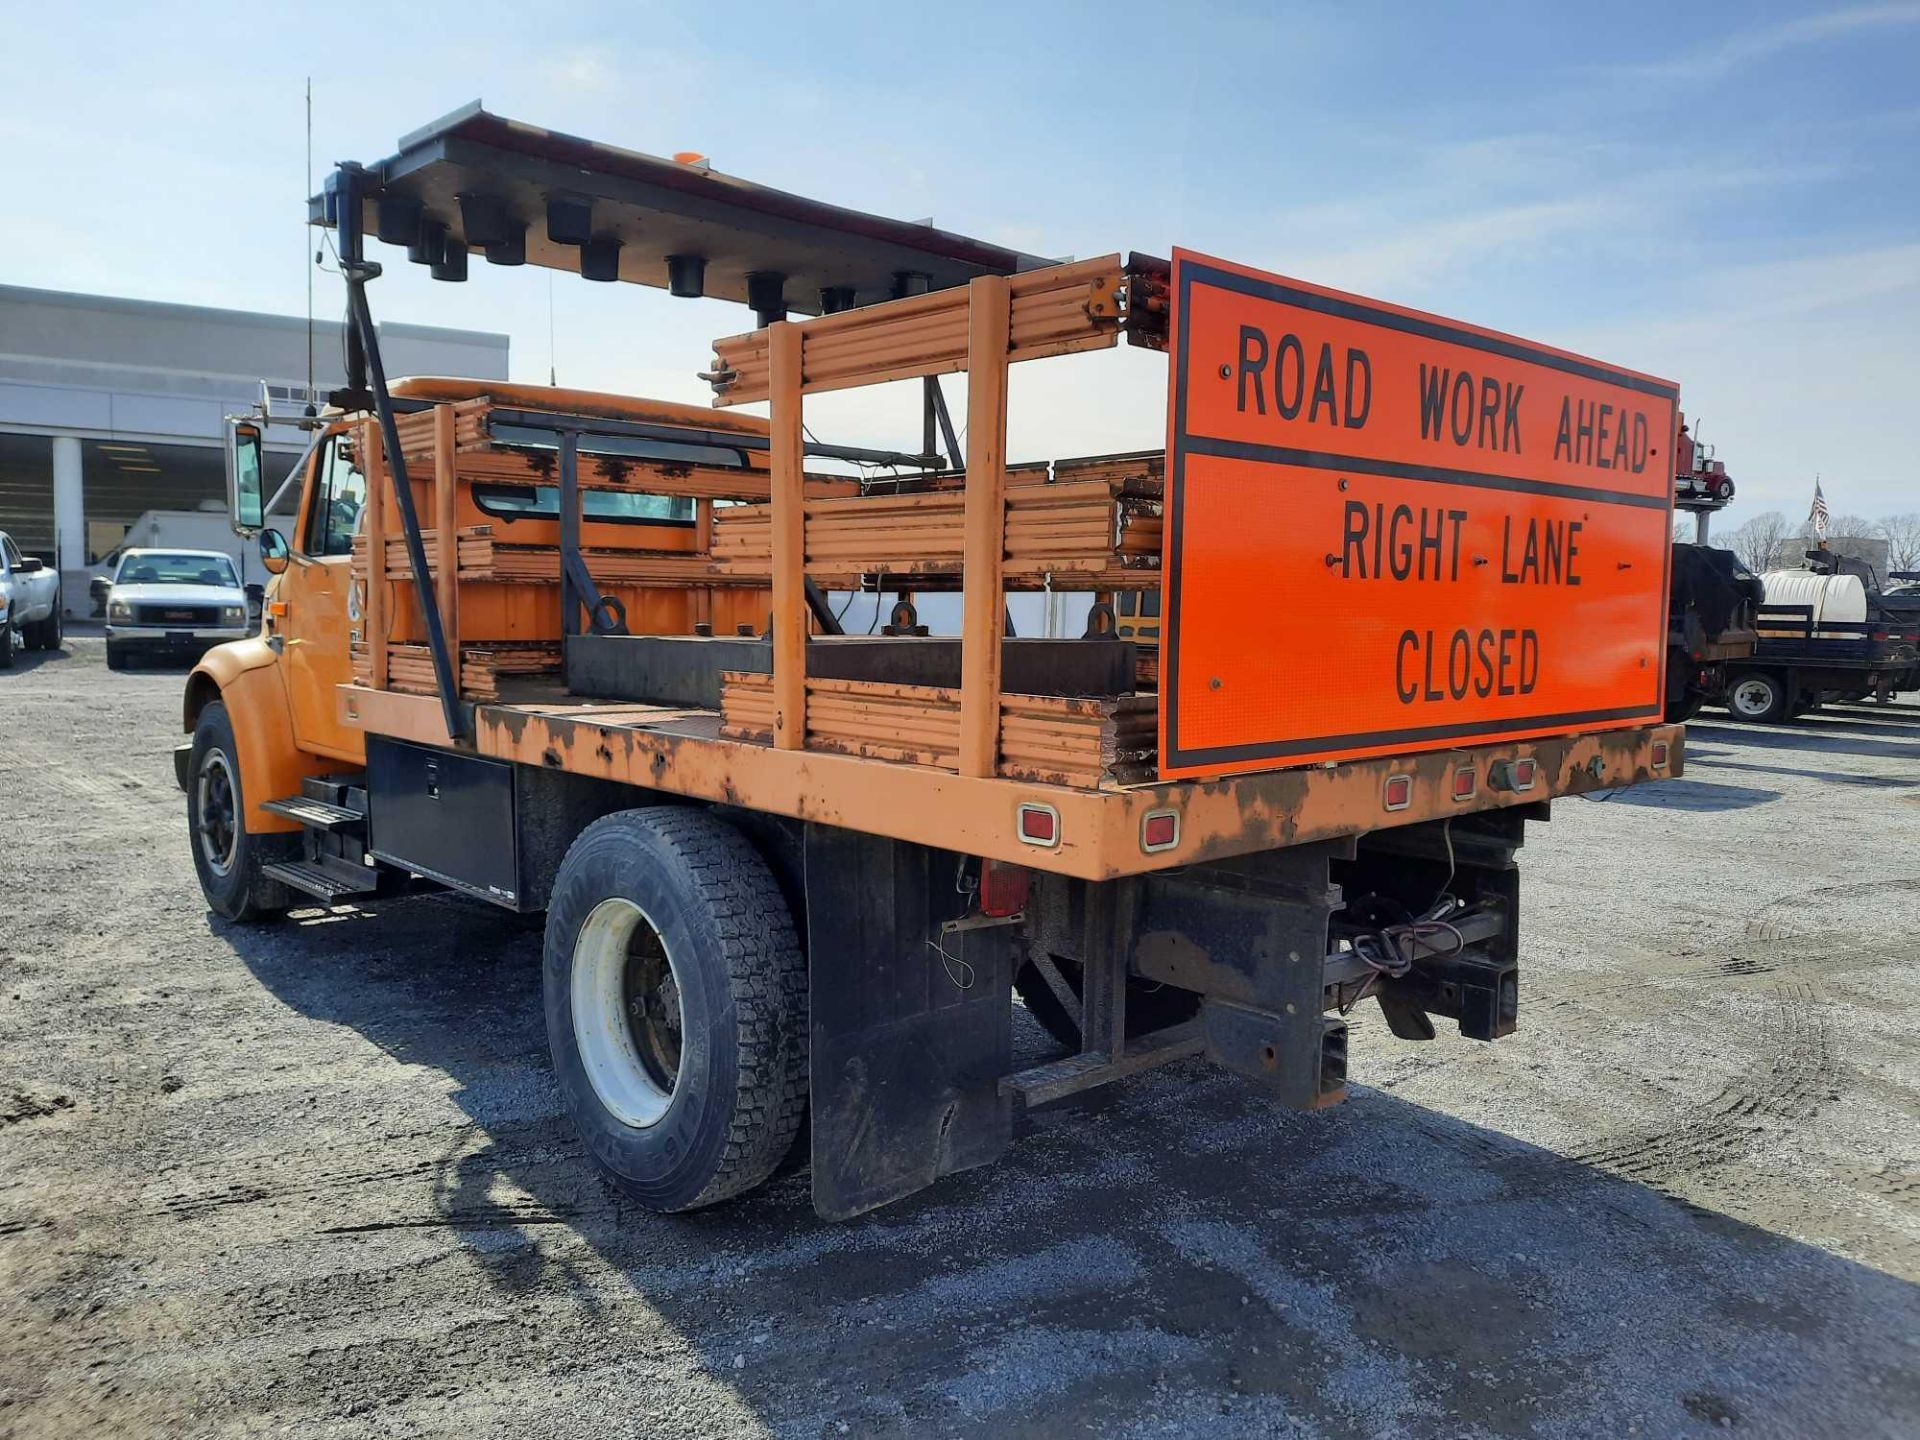 1996 INTL. 4700 STAKEBODY W/ ARROW BOARD TRUCK (VDOT UNIT #: R02715) - Image 2 of 16